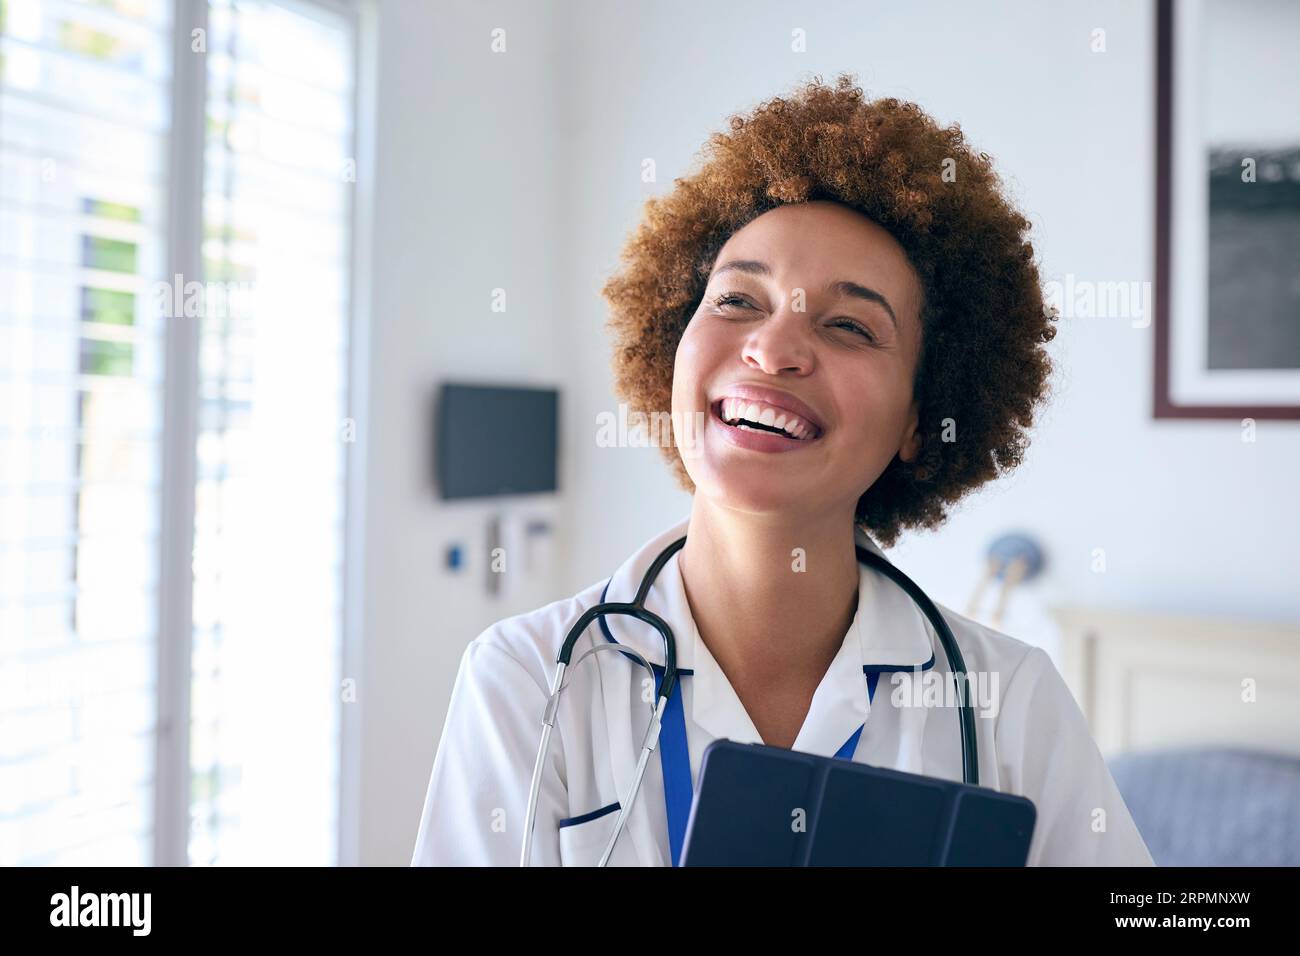 Portrait Of Smiling Female Nurse Wearing Uniform With Digital Tablet In Private Hospital Room Stock Photo